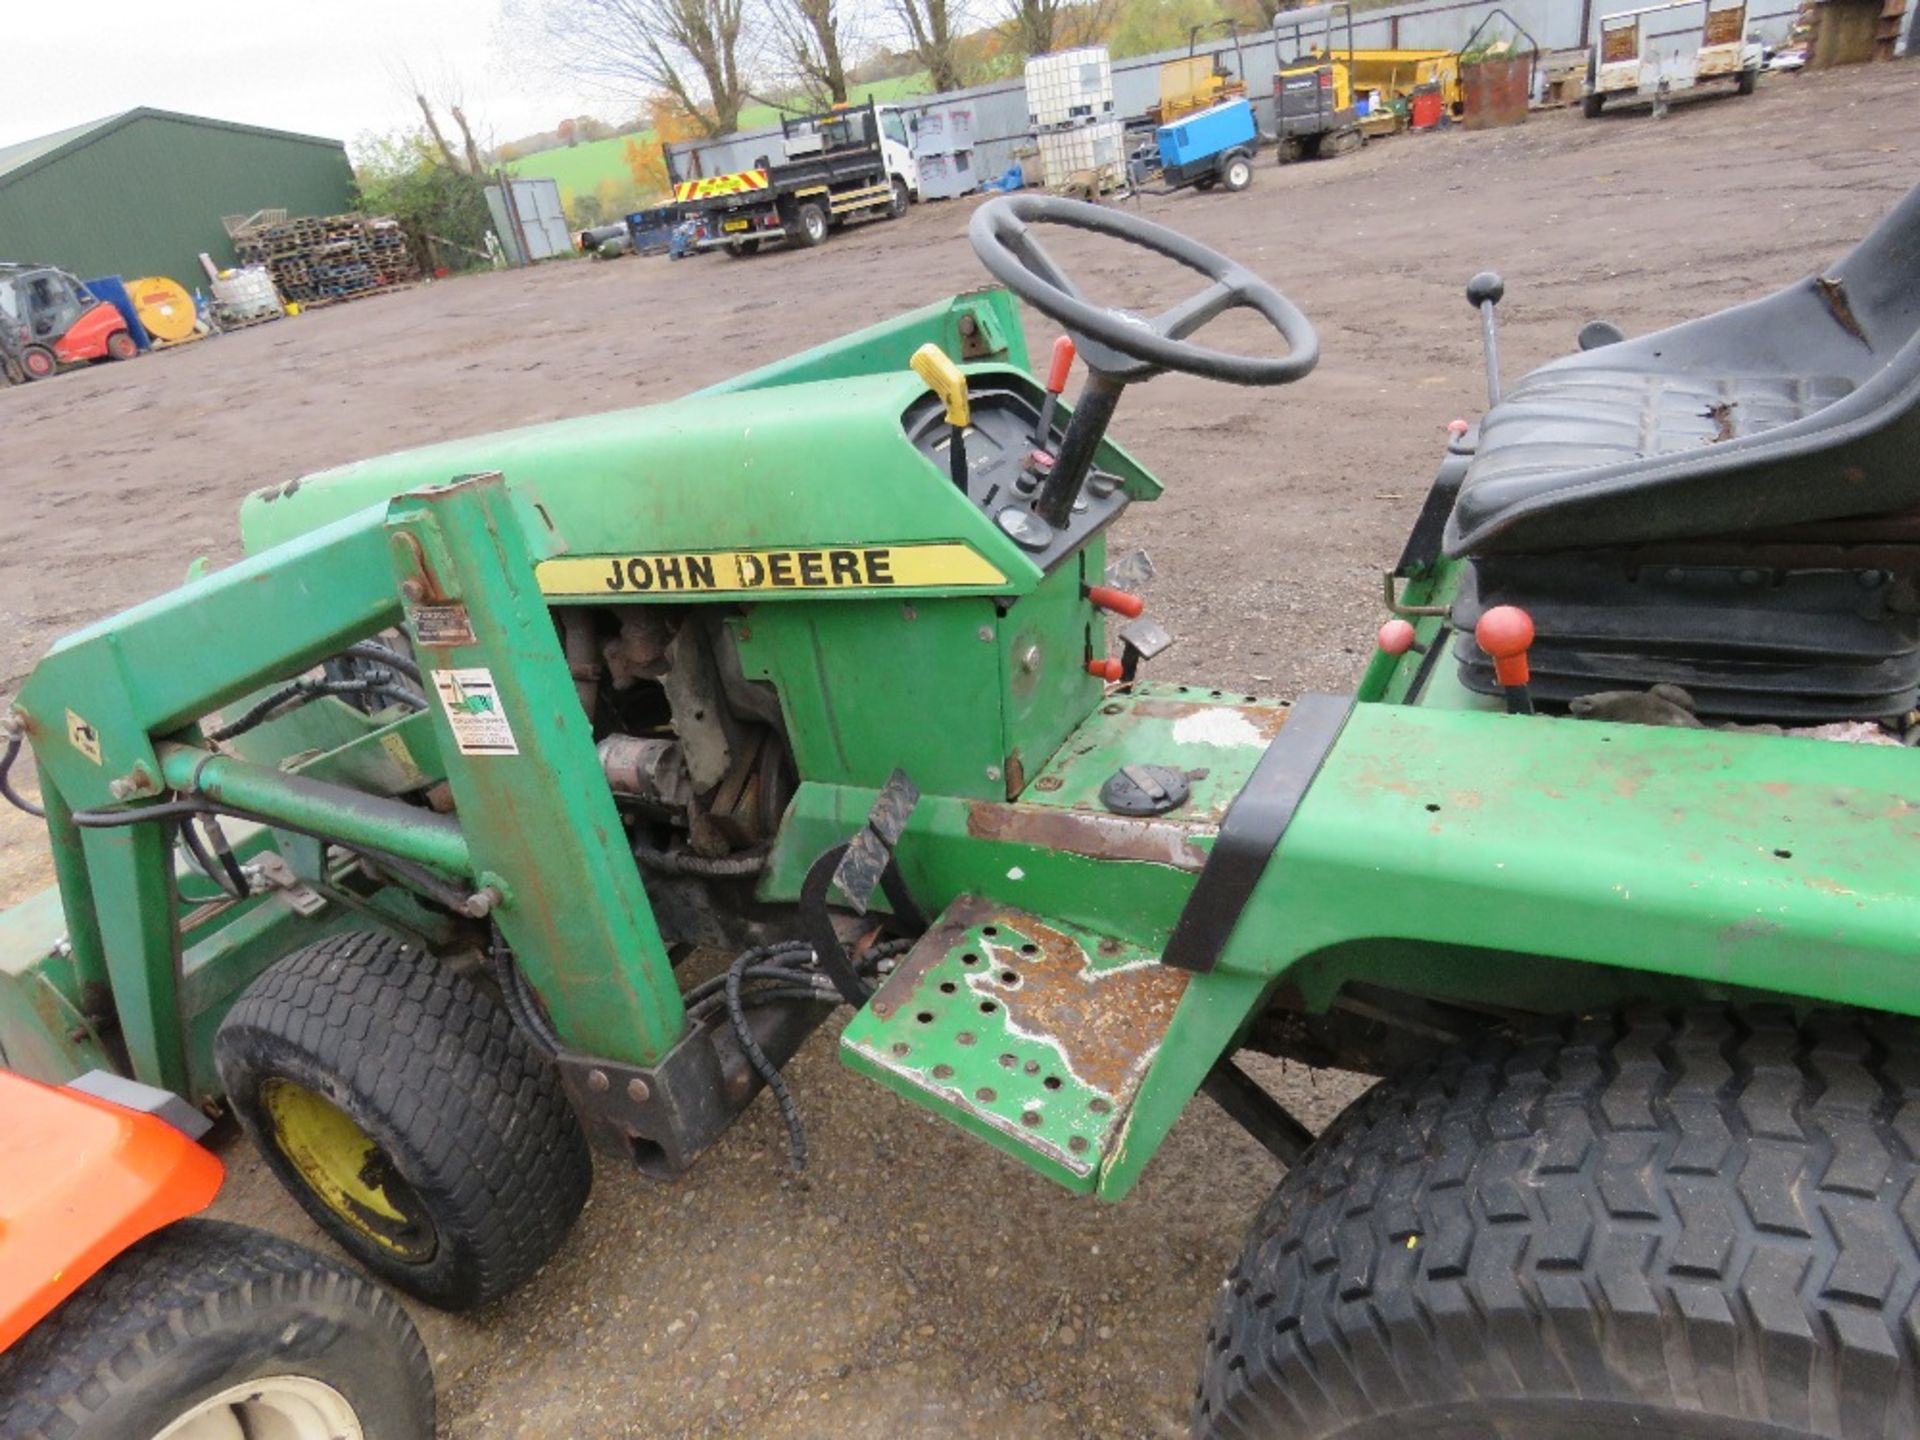 JOHN DEERE 855 4WD COMPACT TRACTOR WITH FOREND LOADER. WHEN TESTED WAS SEEN TO TURN OVER BUT NOT STA - Image 8 of 8